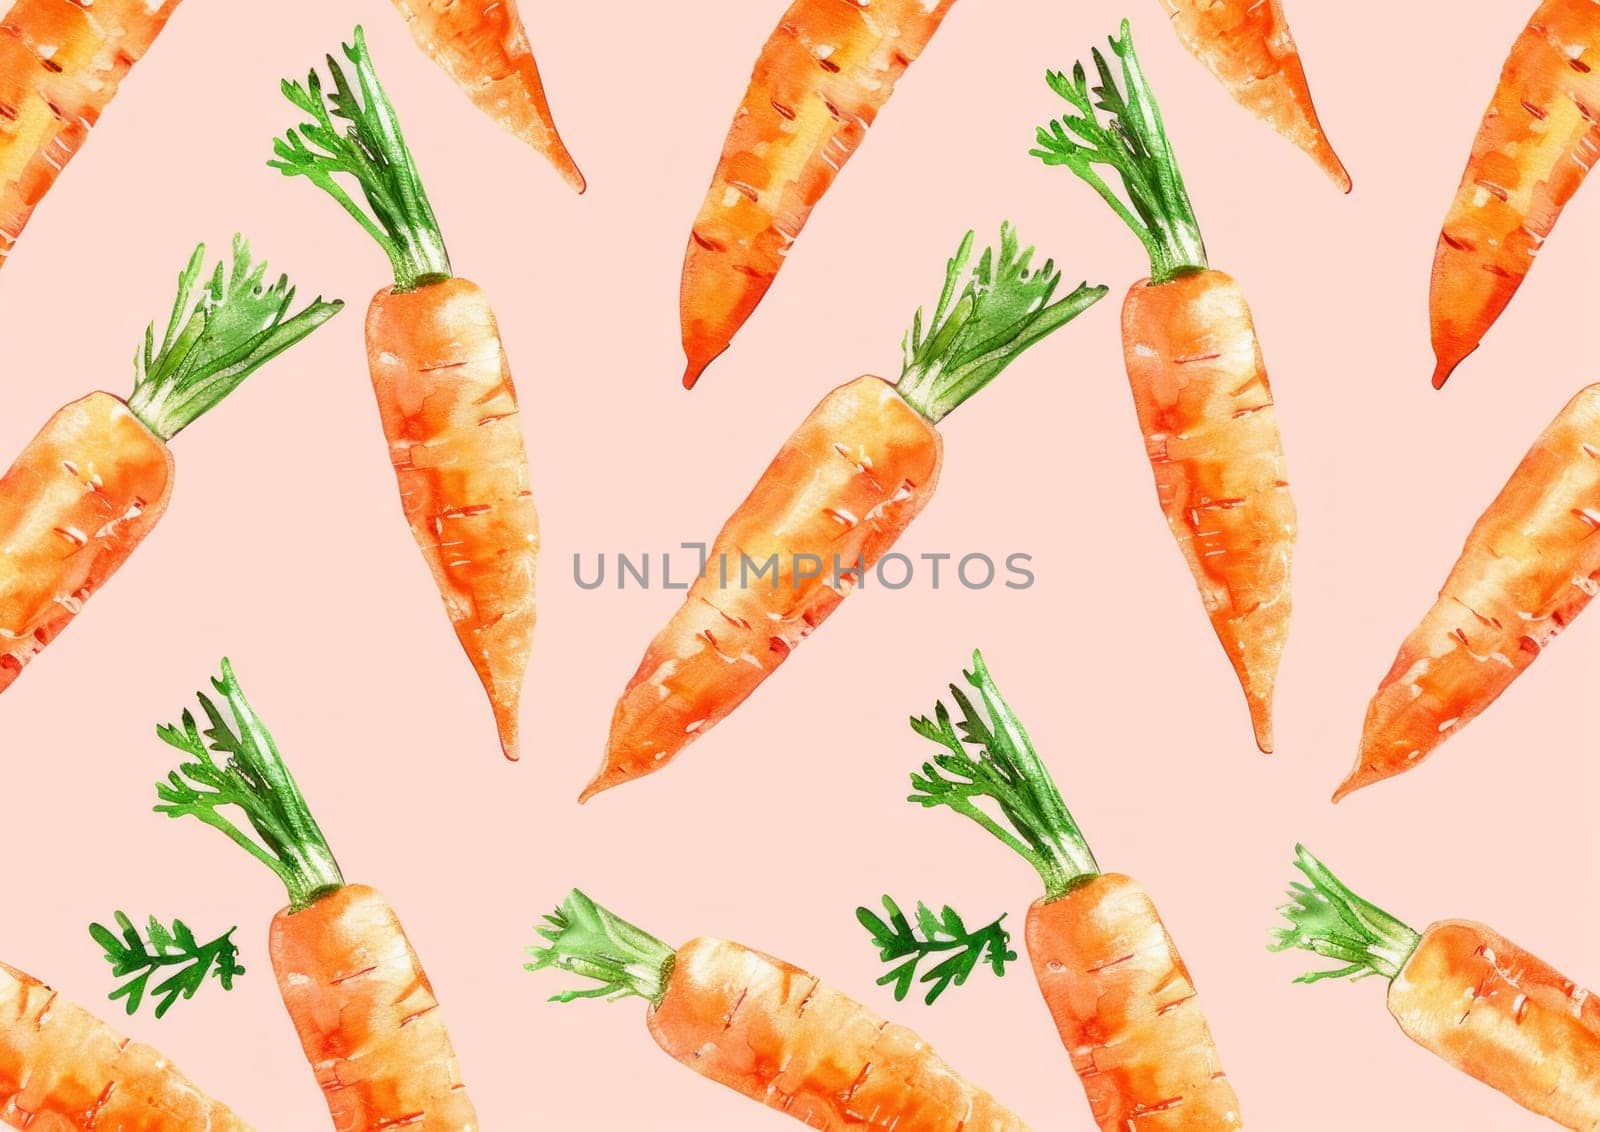 Watercolor seamless pattern of carrots on pink background for food and kitchen design, healthy eating concept